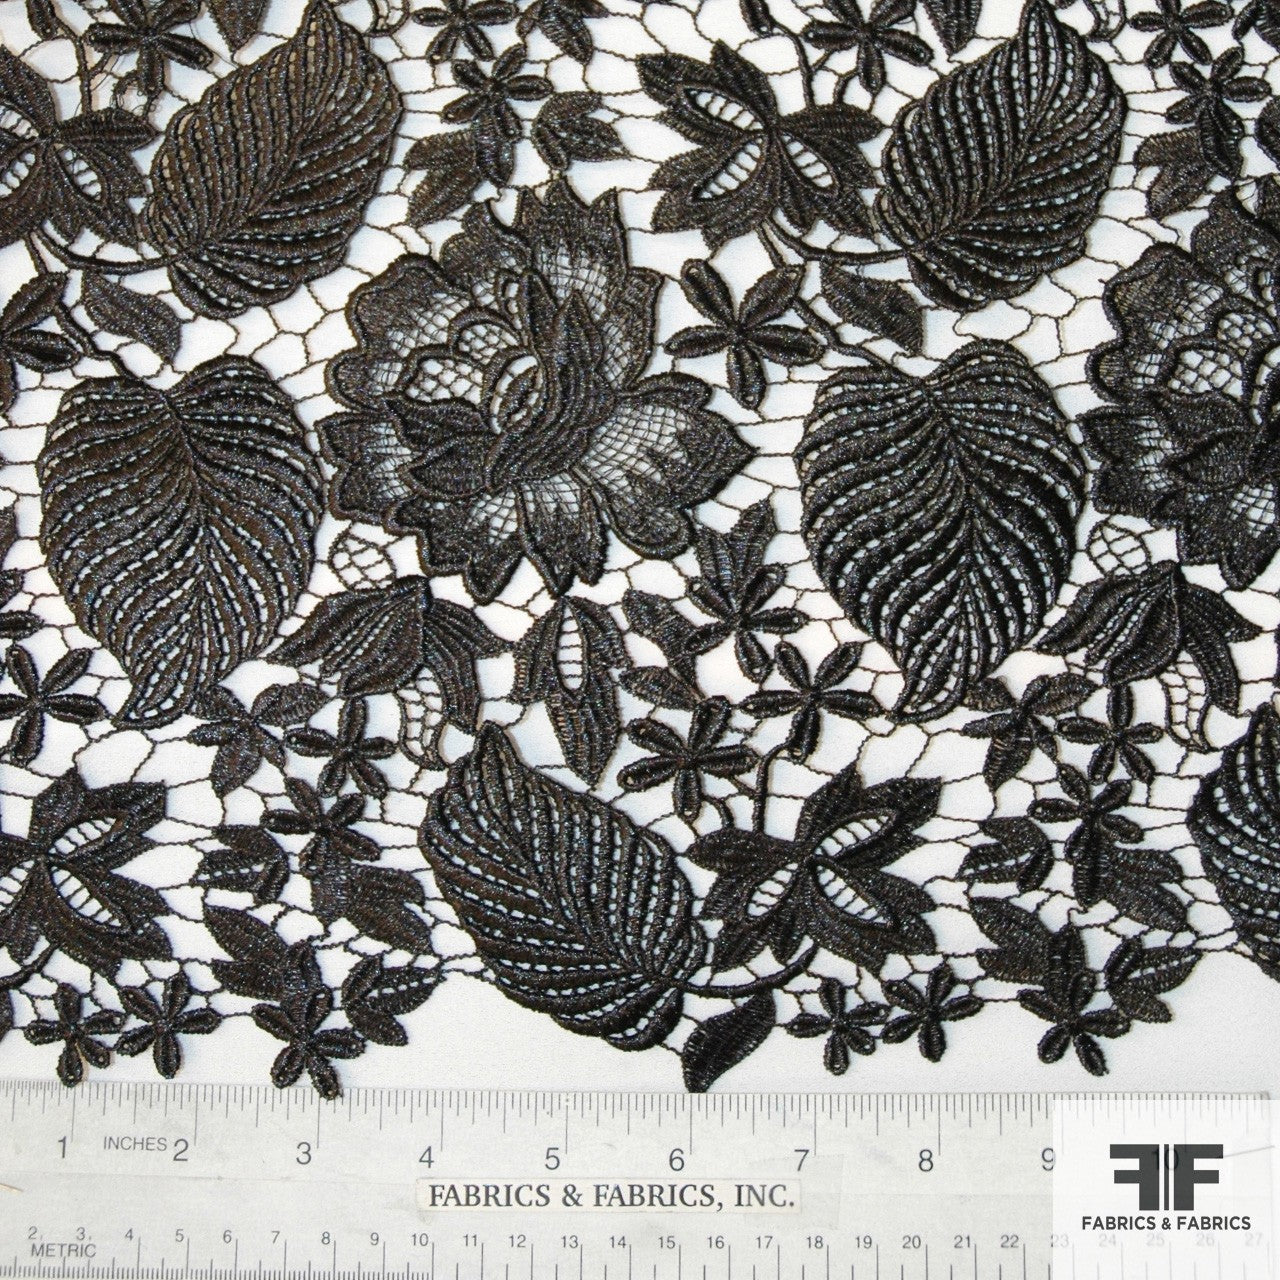 Black Lace Fabric, Black Guipure Lace Fabric, Crochet Lace Fabric, Bridal  Lace Fabric, Lace Fabric With Classical Floral Pattern, Hot 